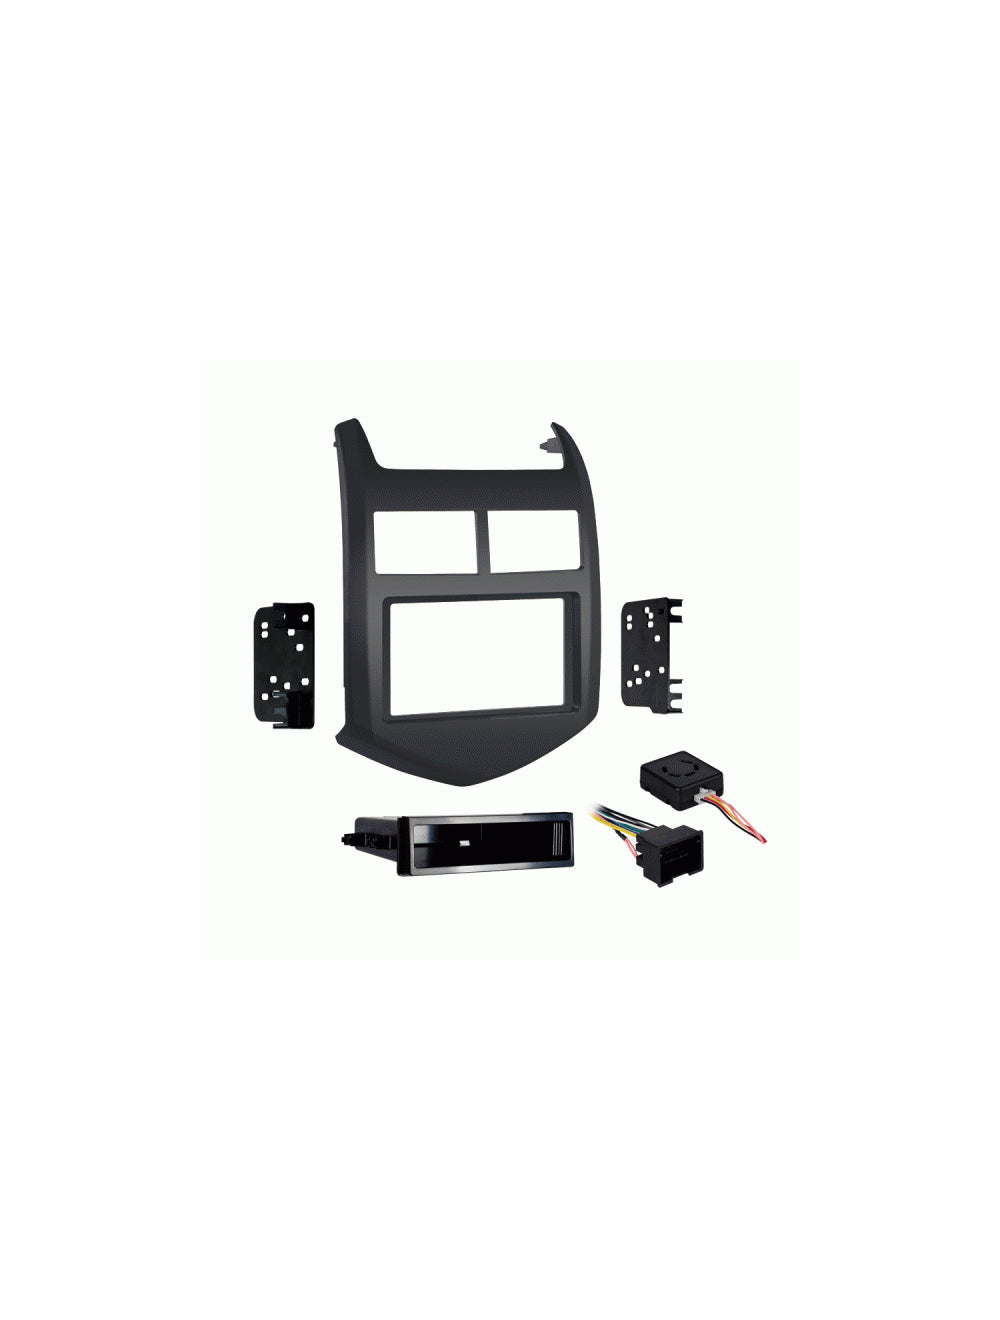 Metra 99-3012G-LC Single and Double Din Installation Kit for 2012-2016 Chevy Sonic